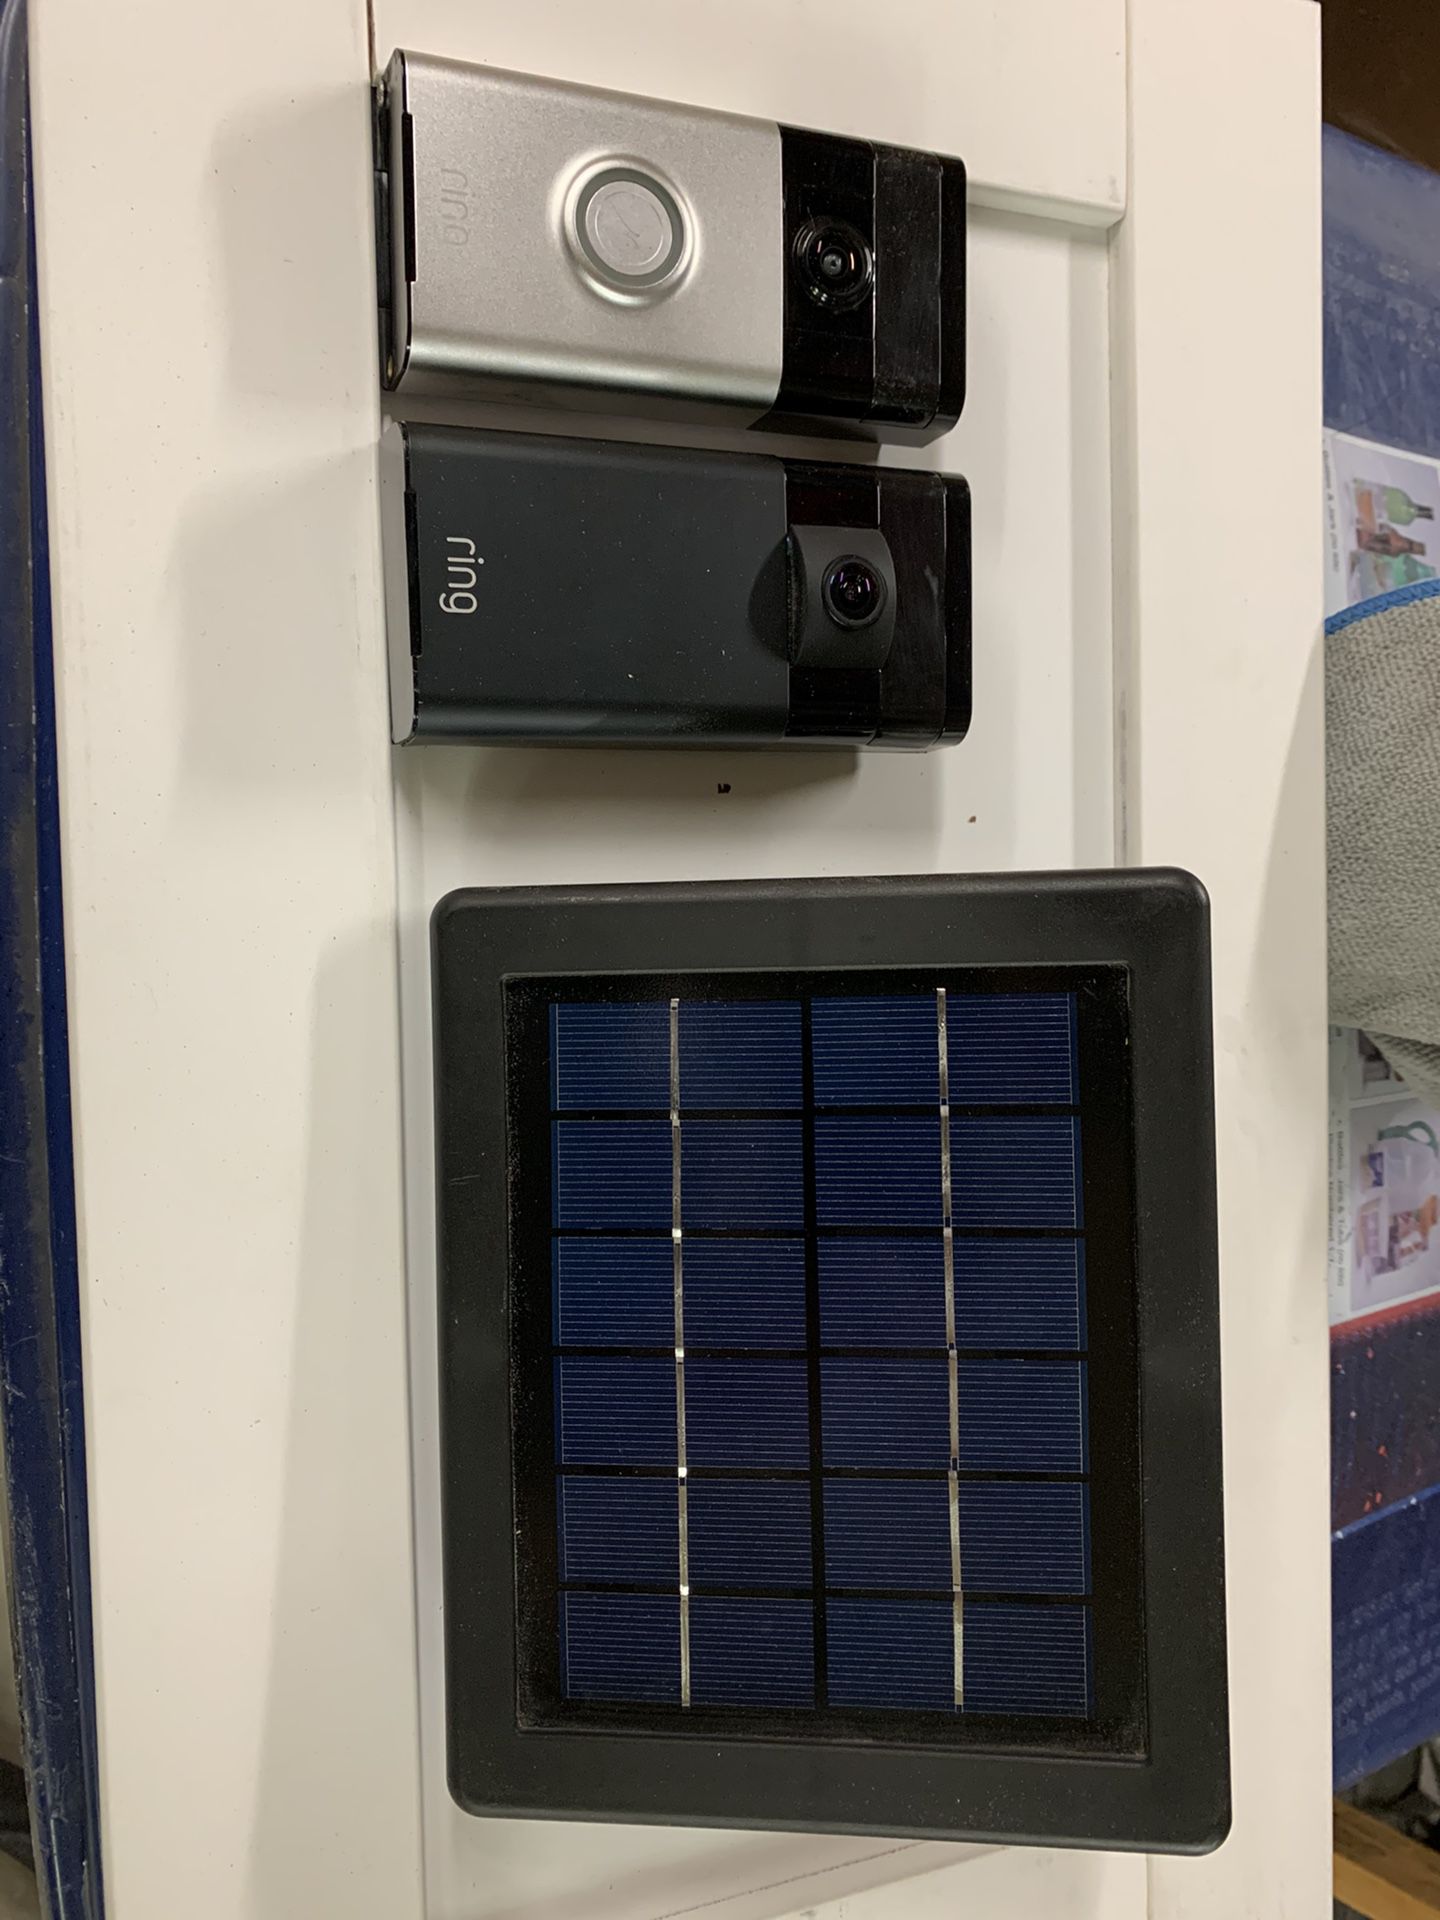 Ring and stick up cam with solar panel